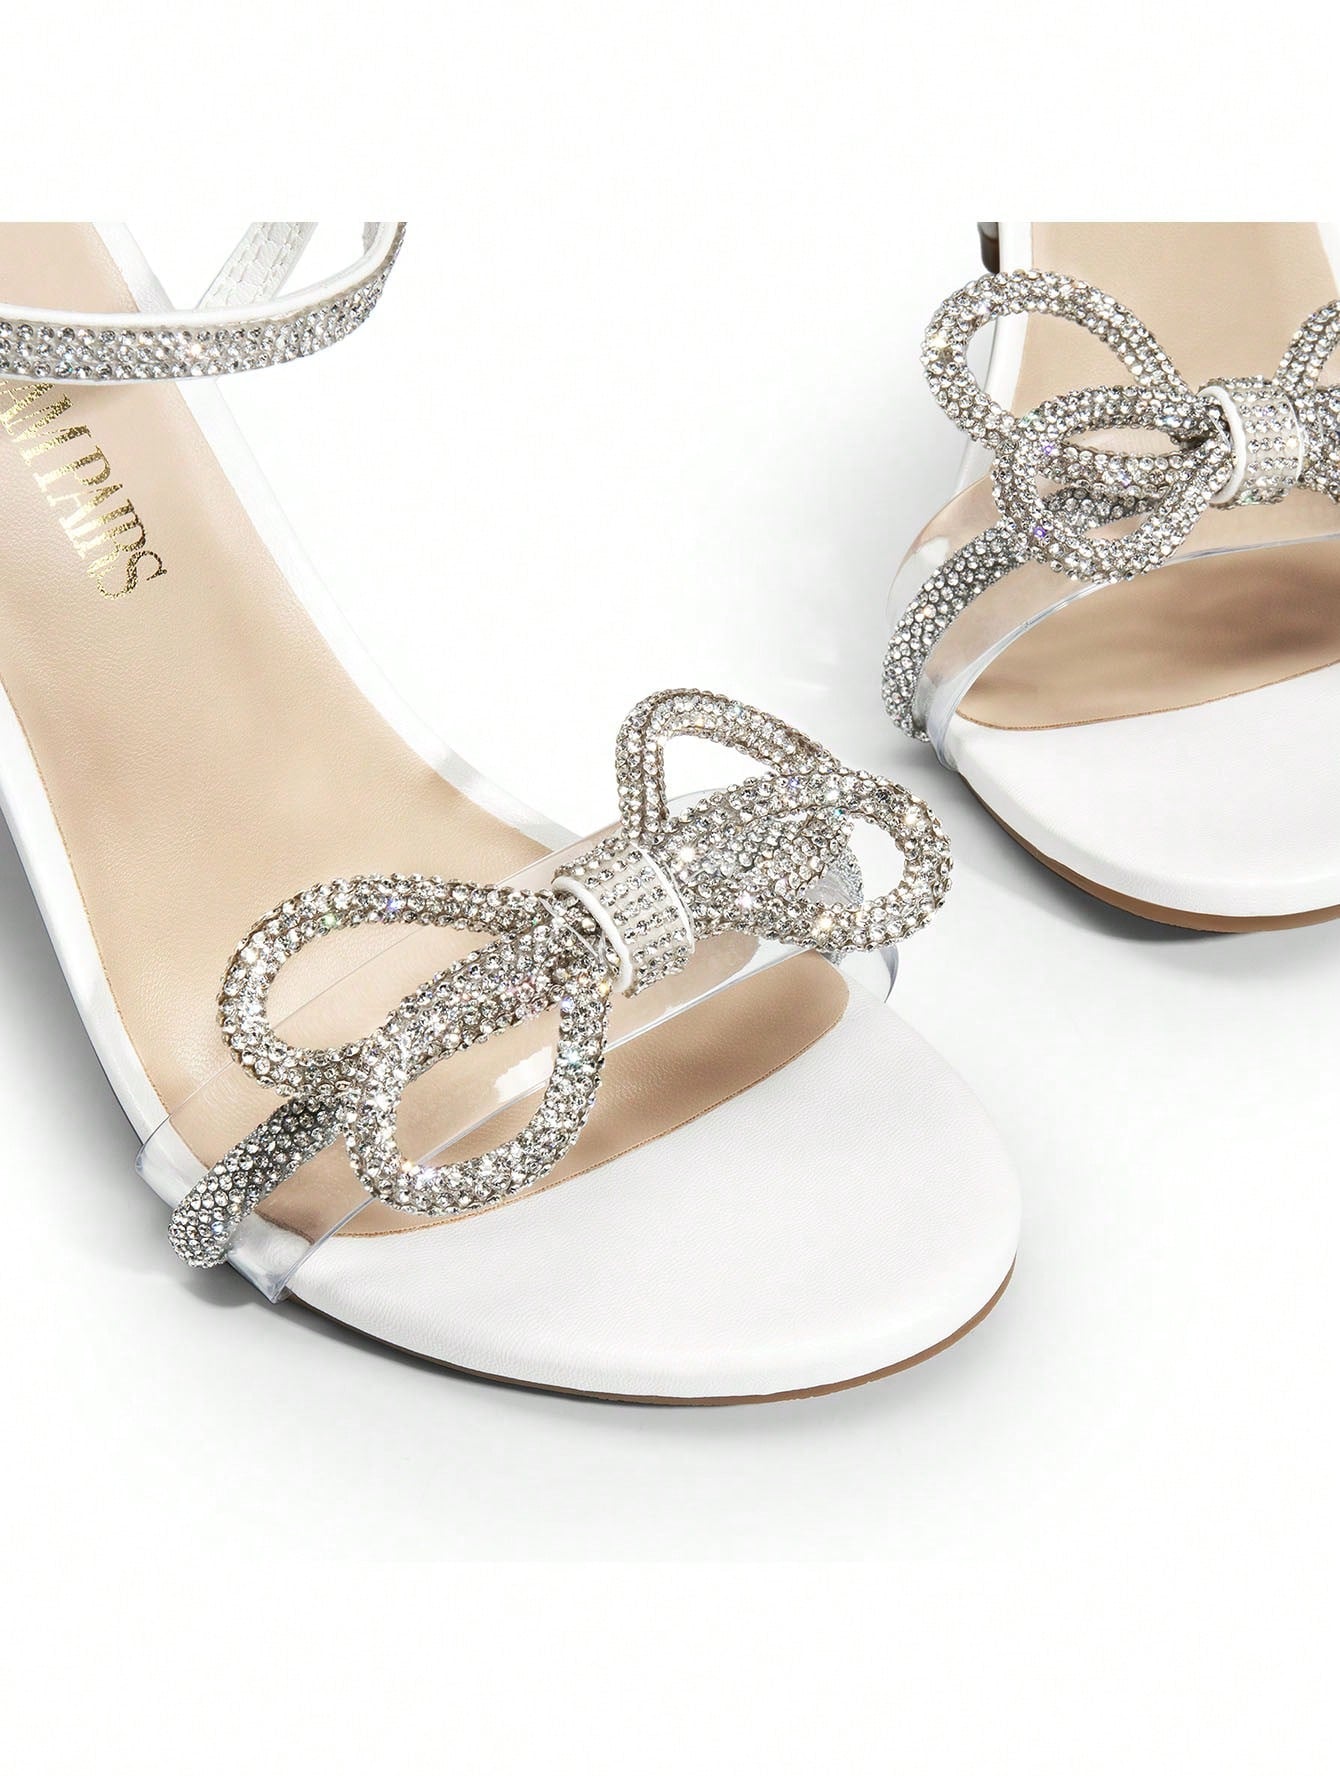 Women Double Bowknots Crystal Heeled Sandals, Open Toe Sparkly Stilettos Summer Sandals For Party Wedding Prom-White-6